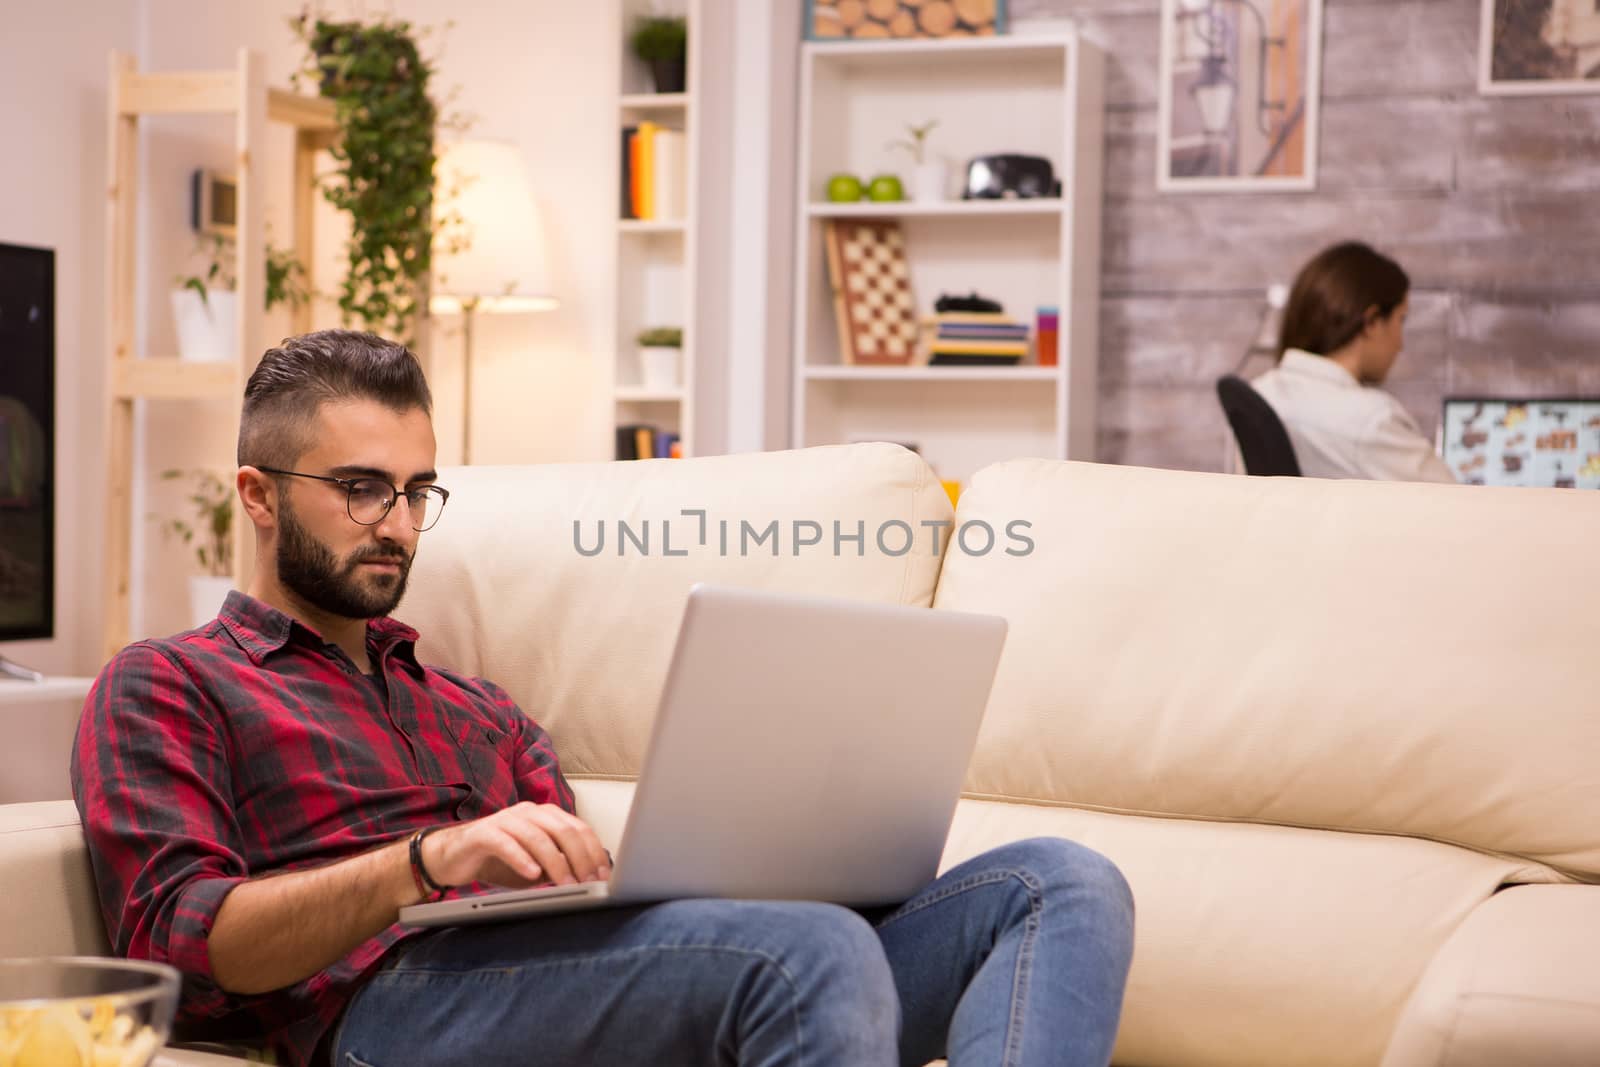 Young entrepreneur working on laptop sitting on sofa. Girlfriend in the background.